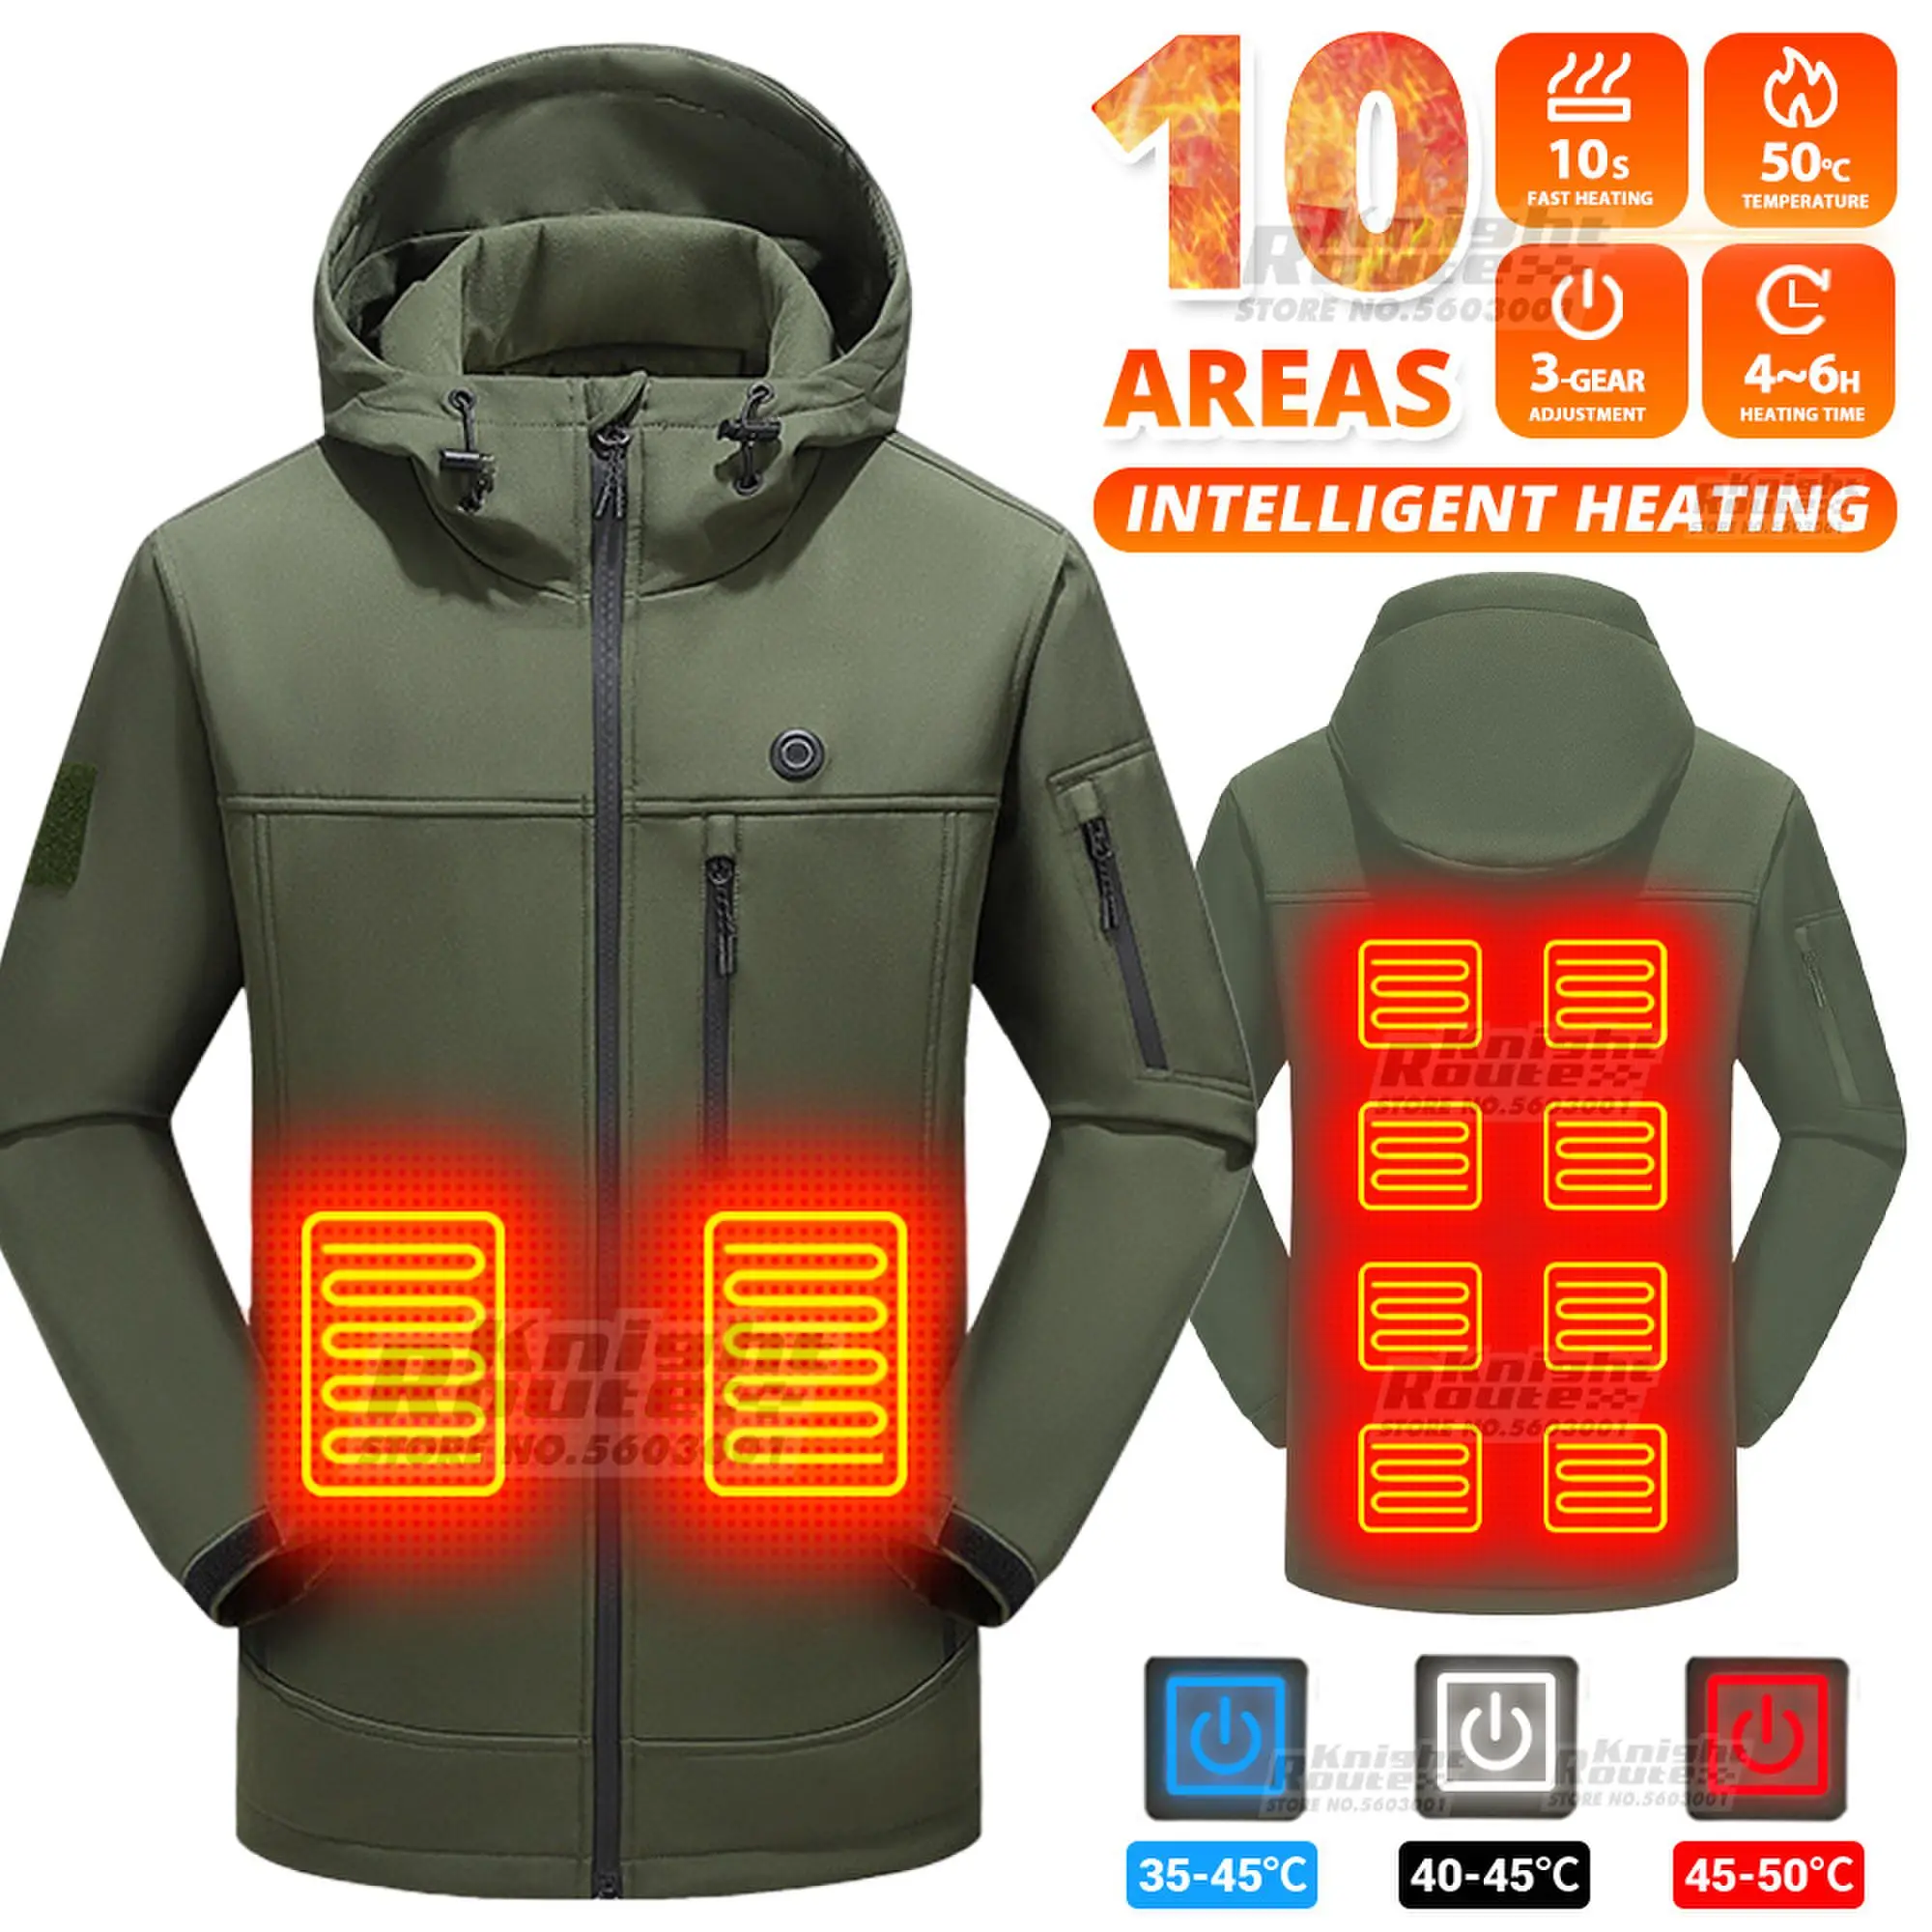 

Men 10 Areas Heated Jacket USB Electric Heating Vest For women Winter Outdoor Warm Thermal Coat Parka Jacket NEW Cotton jacket